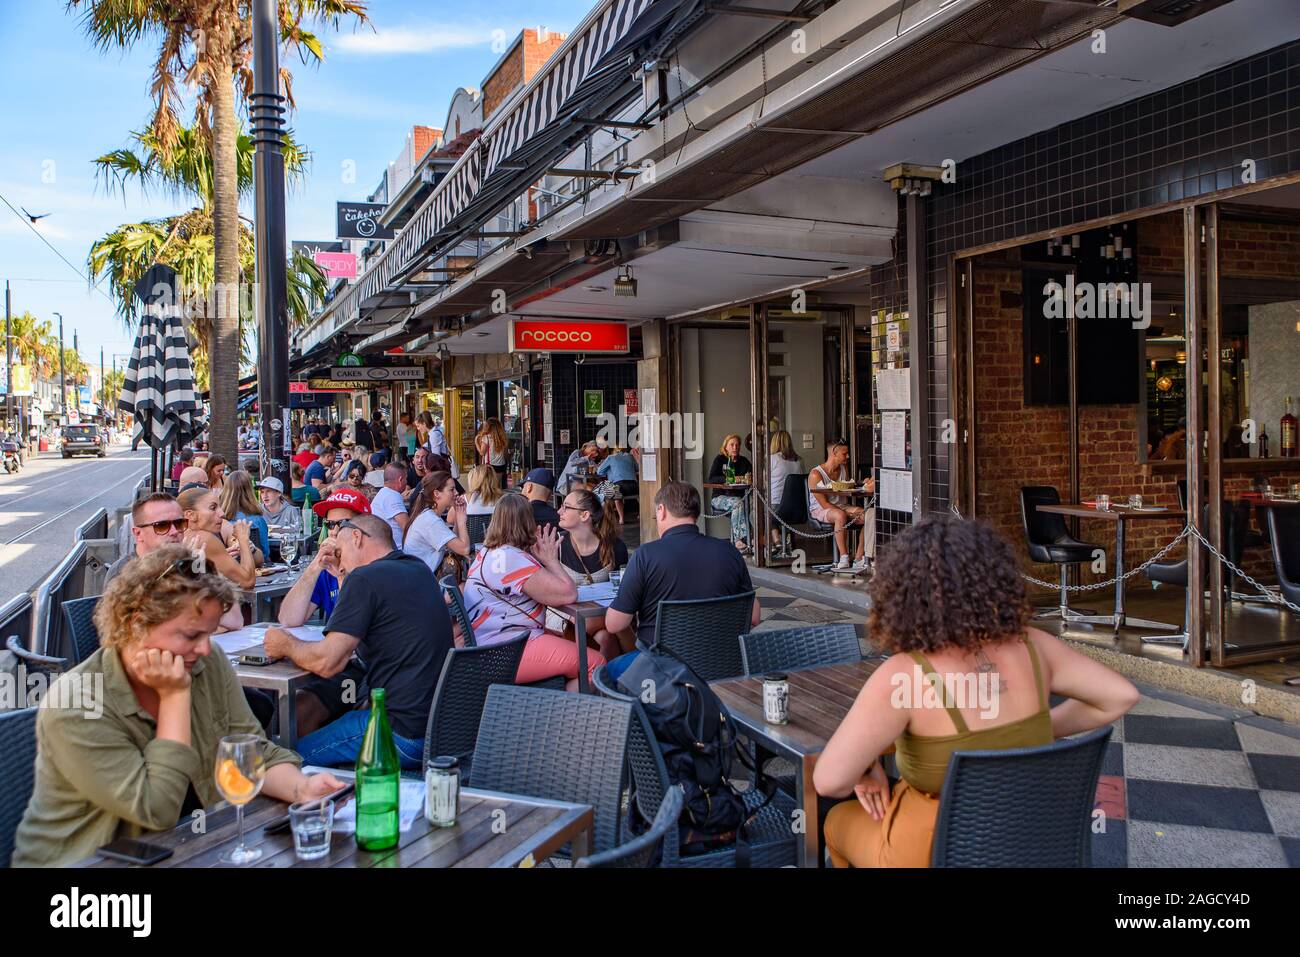 People enjoying food and drink at outdoor seats at St Kilda, Melbourne, Australia Stock Photo